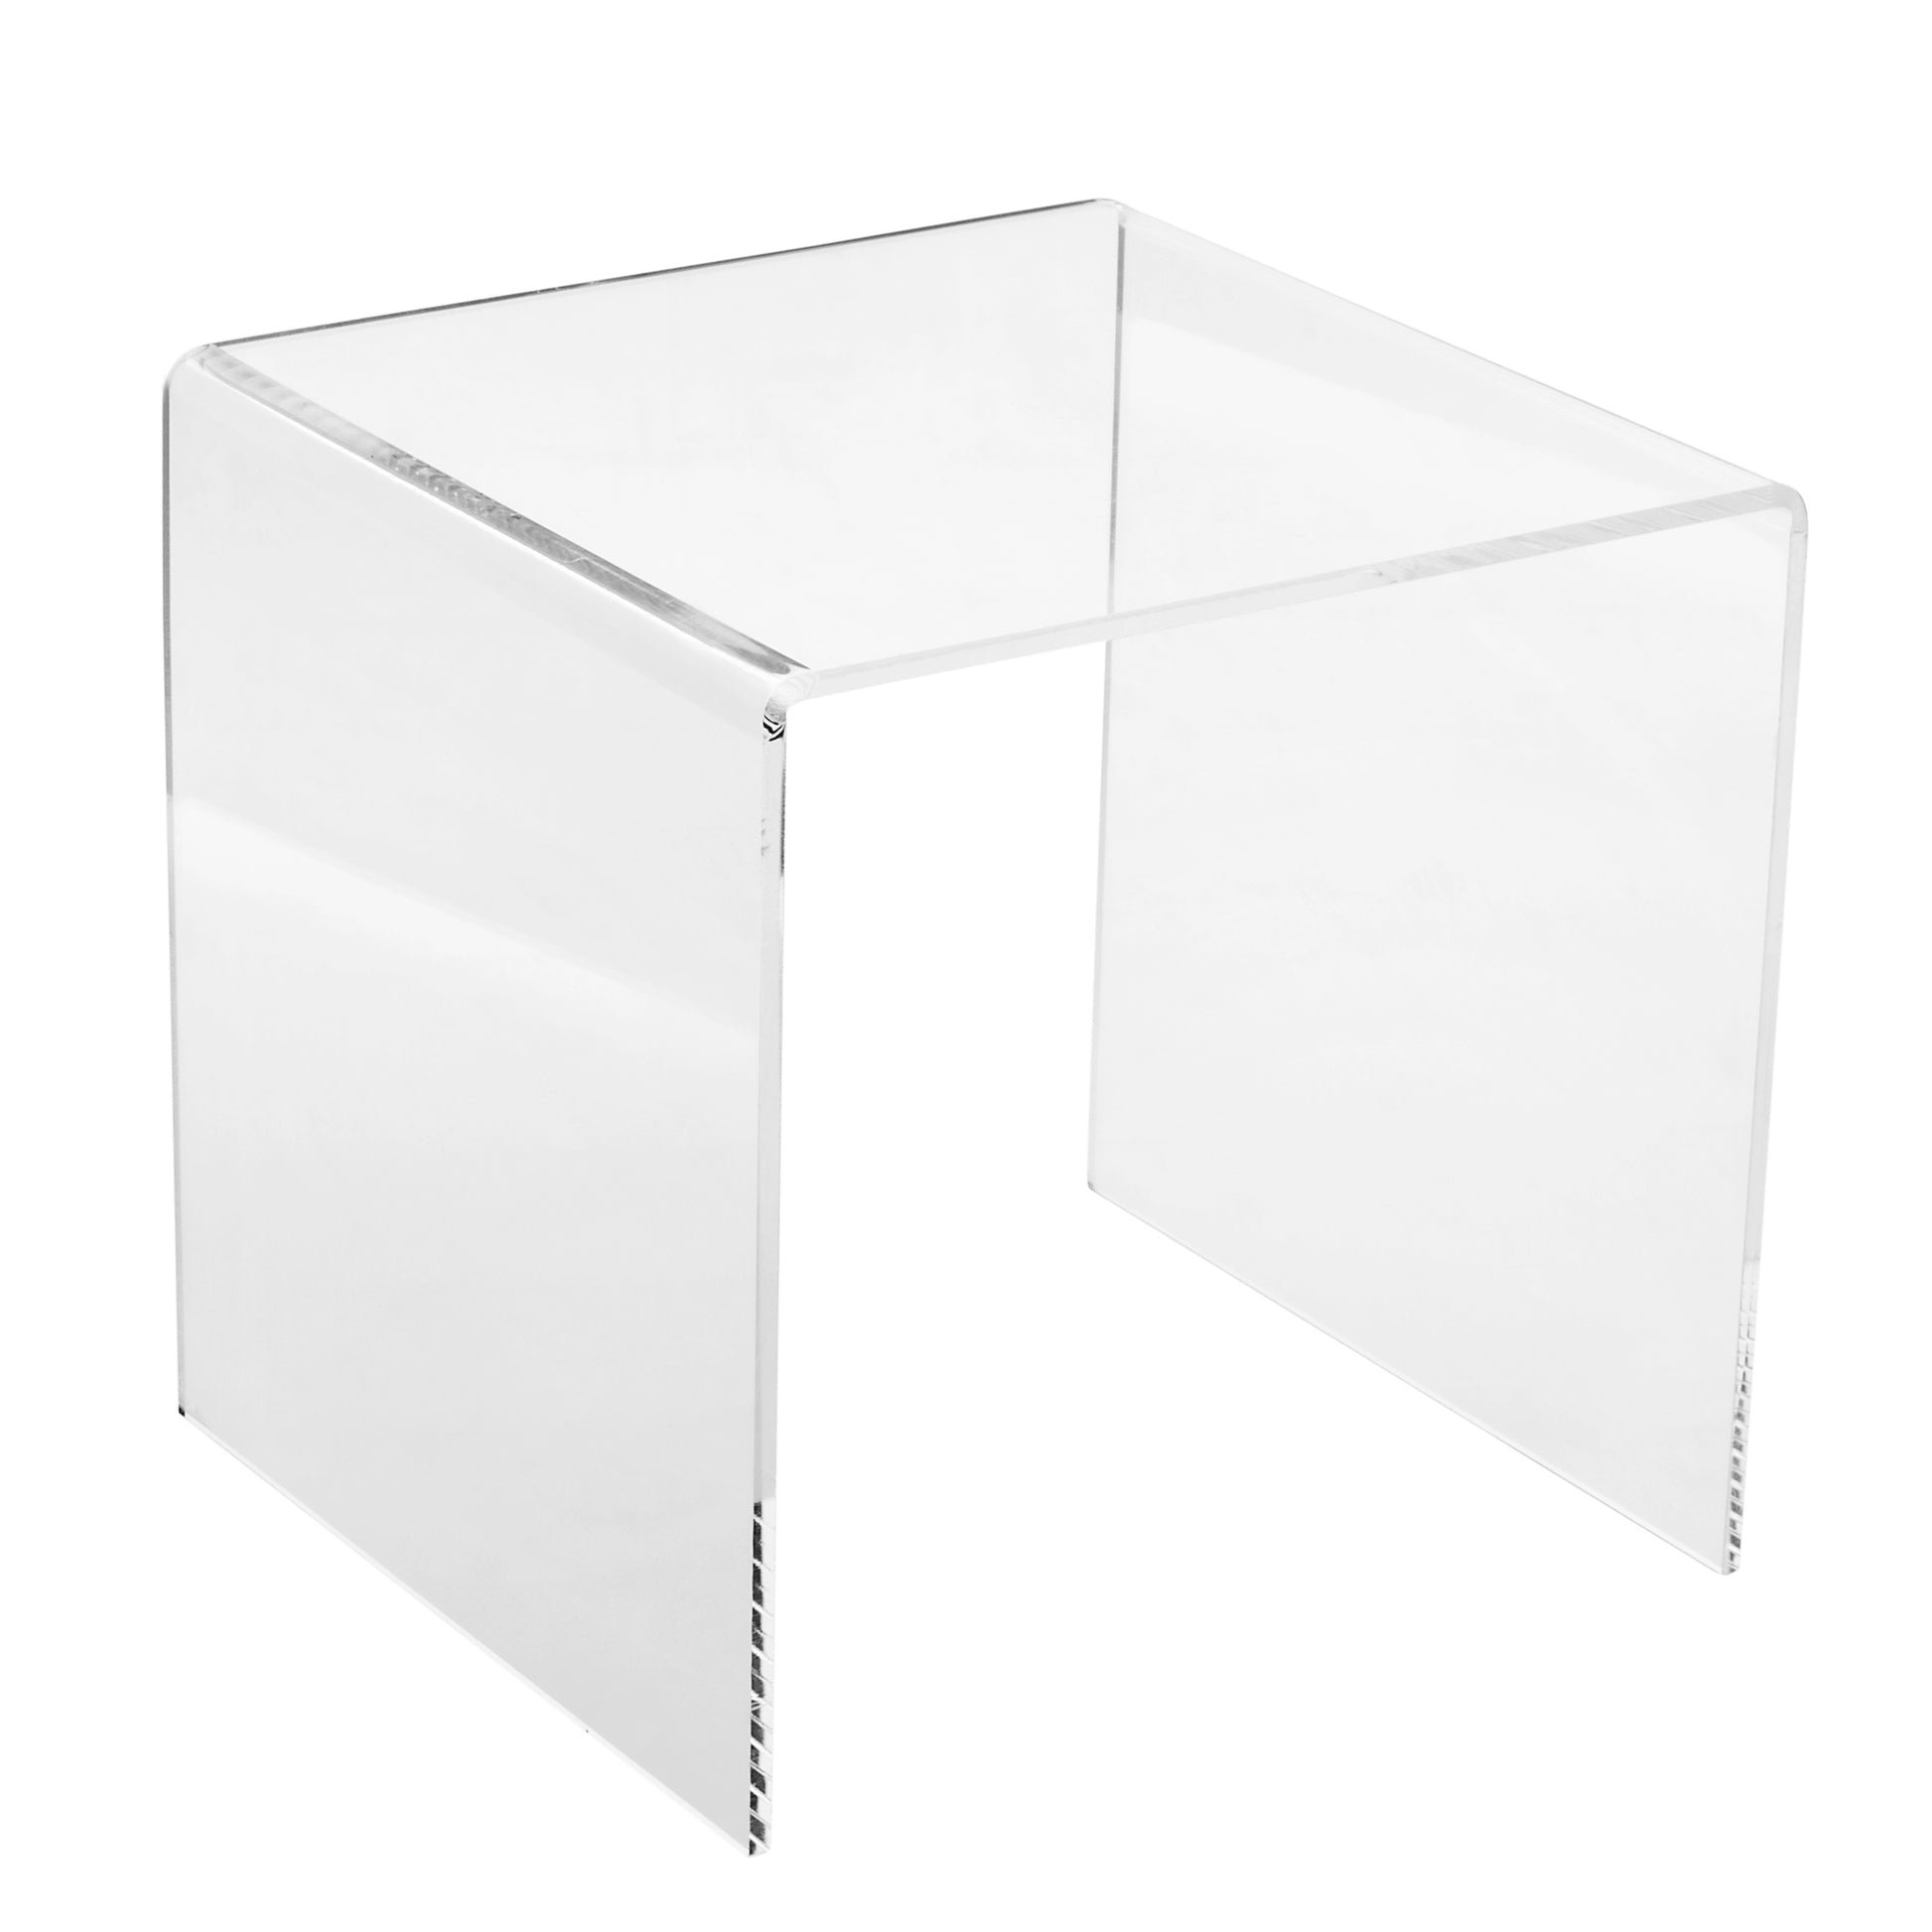 Set of 3 Acrylic Riser Display Stands - Clear - CV Linens